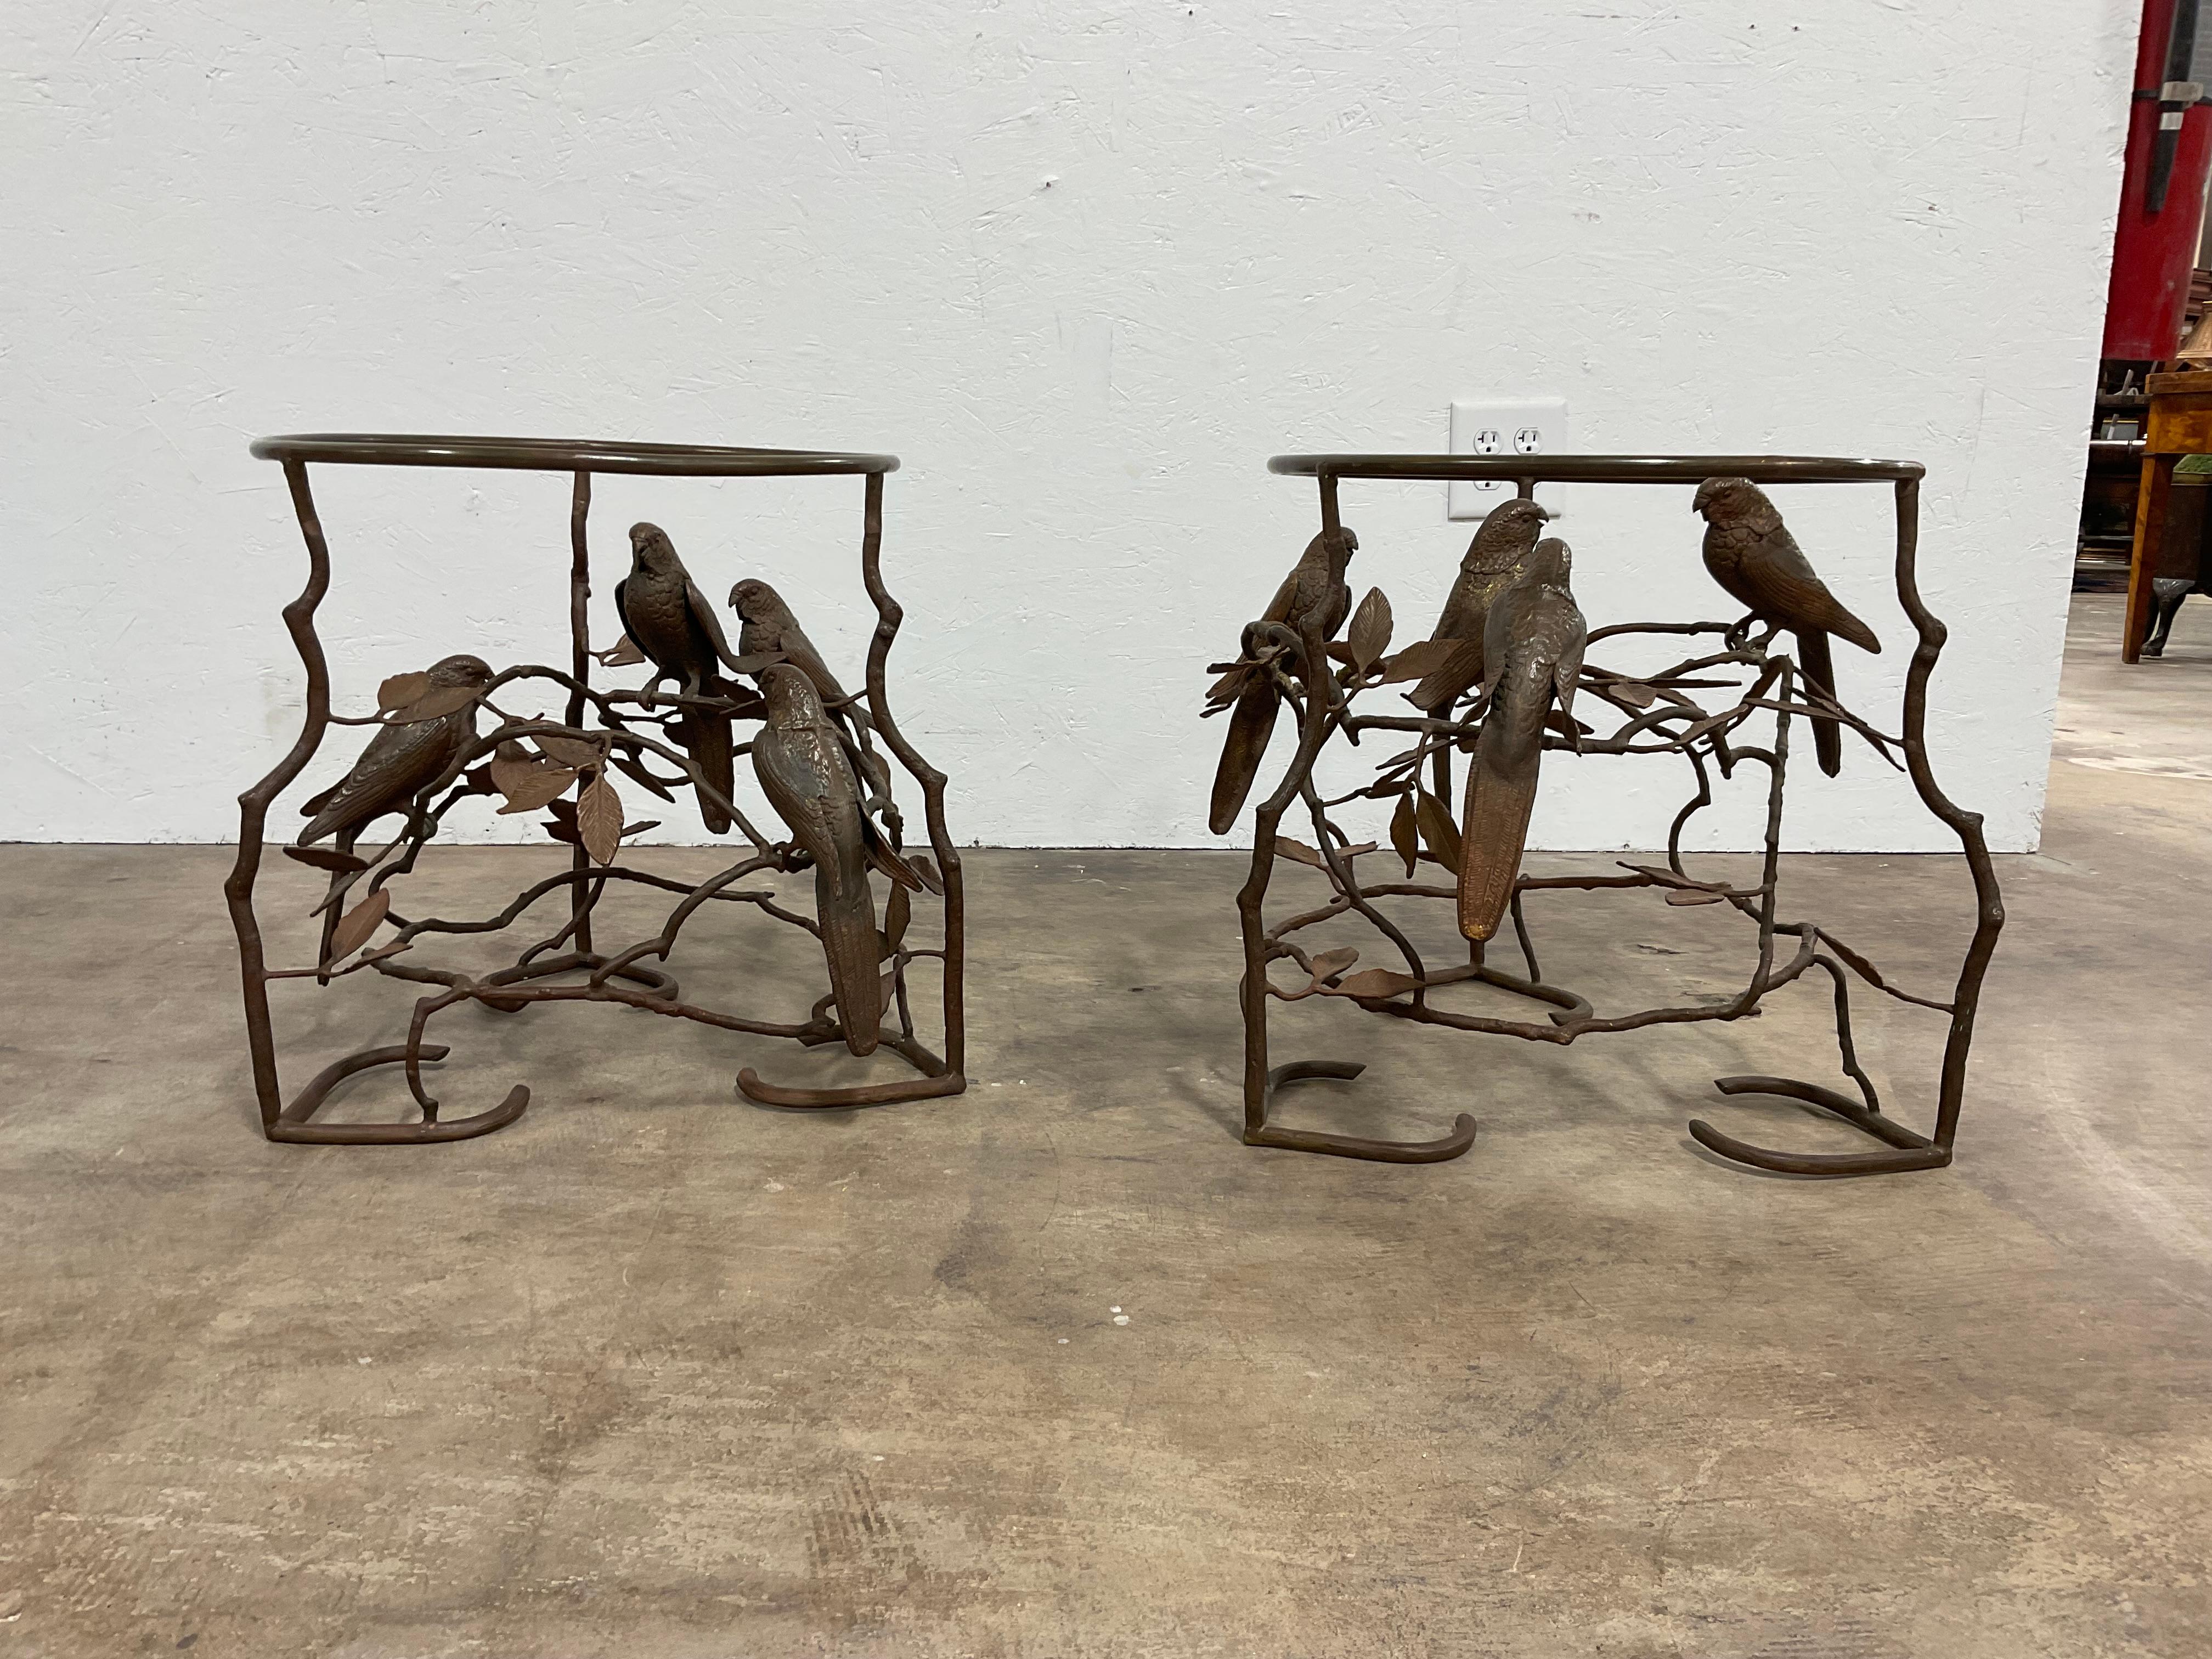 Most unusual pair of handmade brass tables with vines, leaves and parrots. Dating from the late 60s, these tables were bought in Mexico. Original patina to the brass( which could be polished). In the naturalistic style,  reminiscent of Alberto